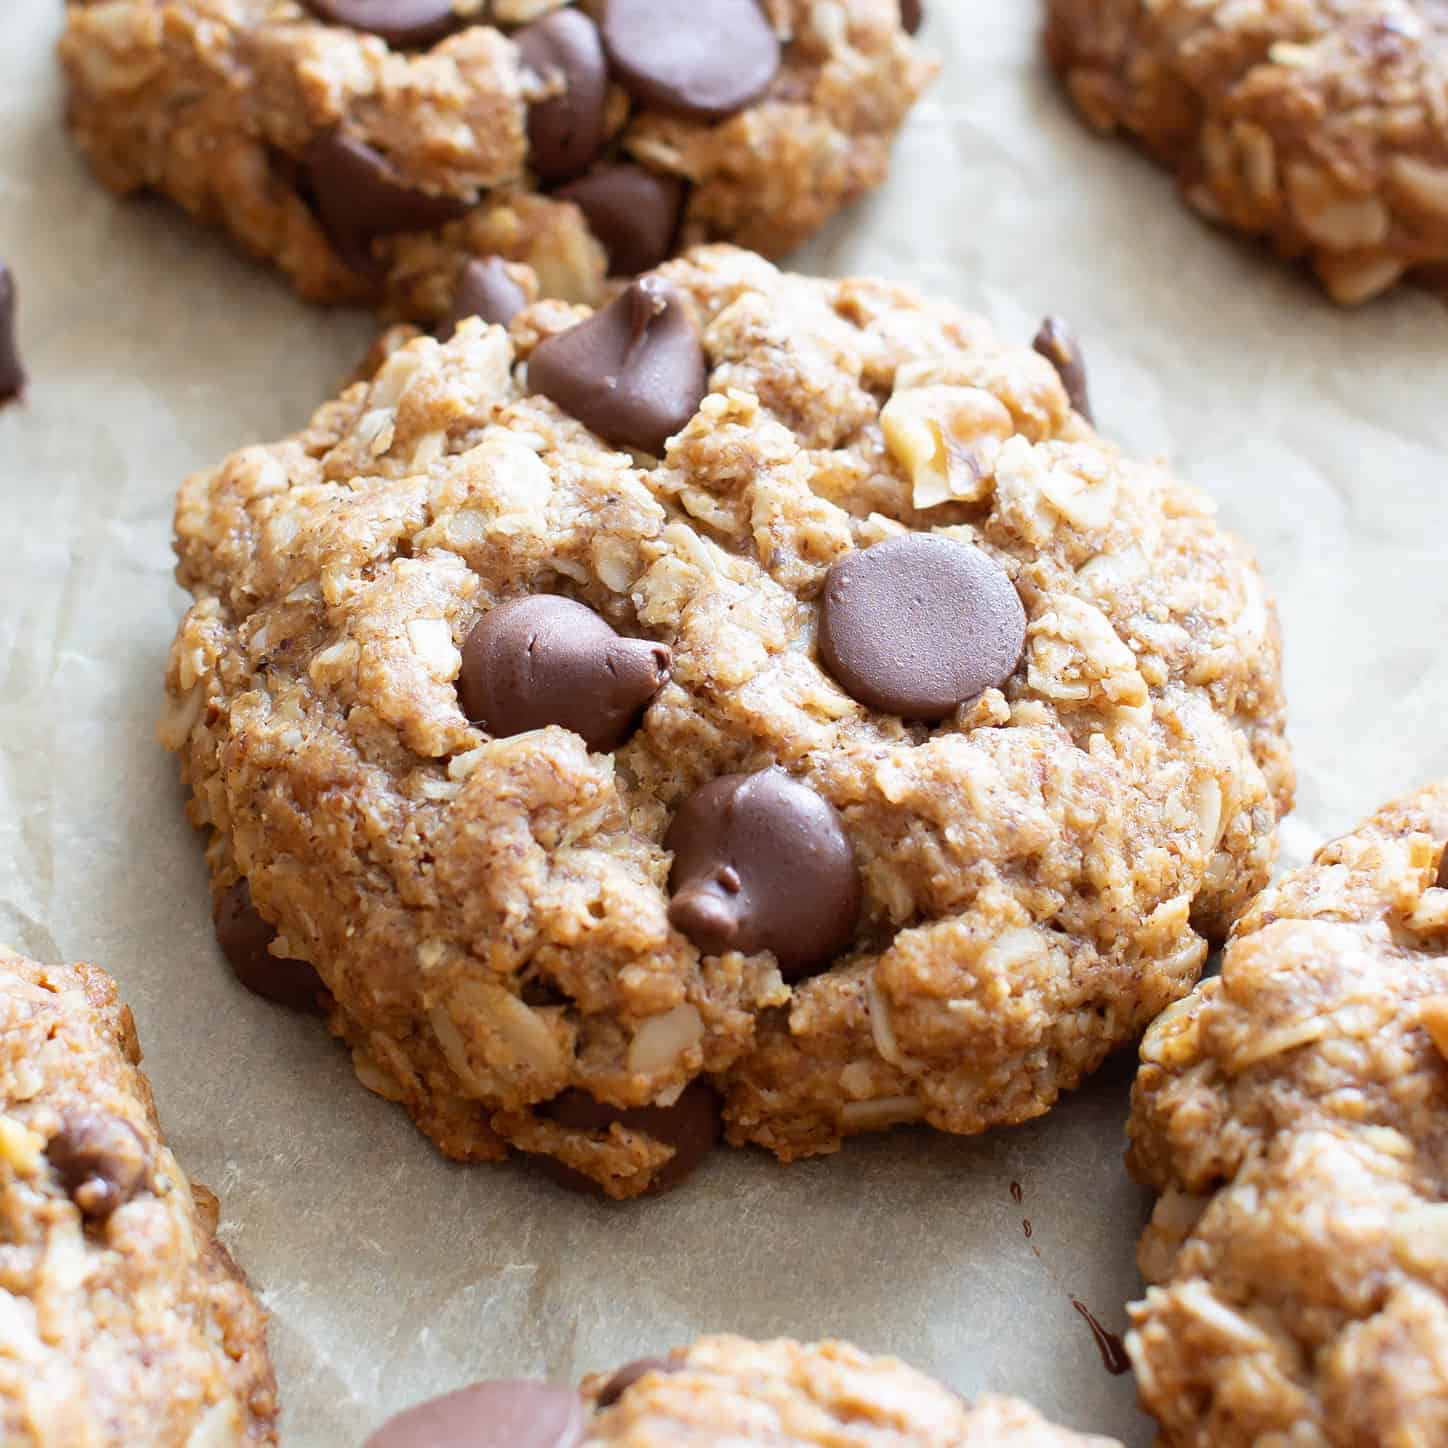 The BEST Vegan Gluten Free Cookies, all in one place! Find vegan gluten free oatmeal cookies, vegan gluten free chocolate chip cookies, V+GF peanut butter cookies, cookie dough, oatmeal raisin and more! #VeganGlutenFree #VeganCookies #GlutenFreeVegan #GlutenFreeCookies | Recipes at BeamingBaker.com